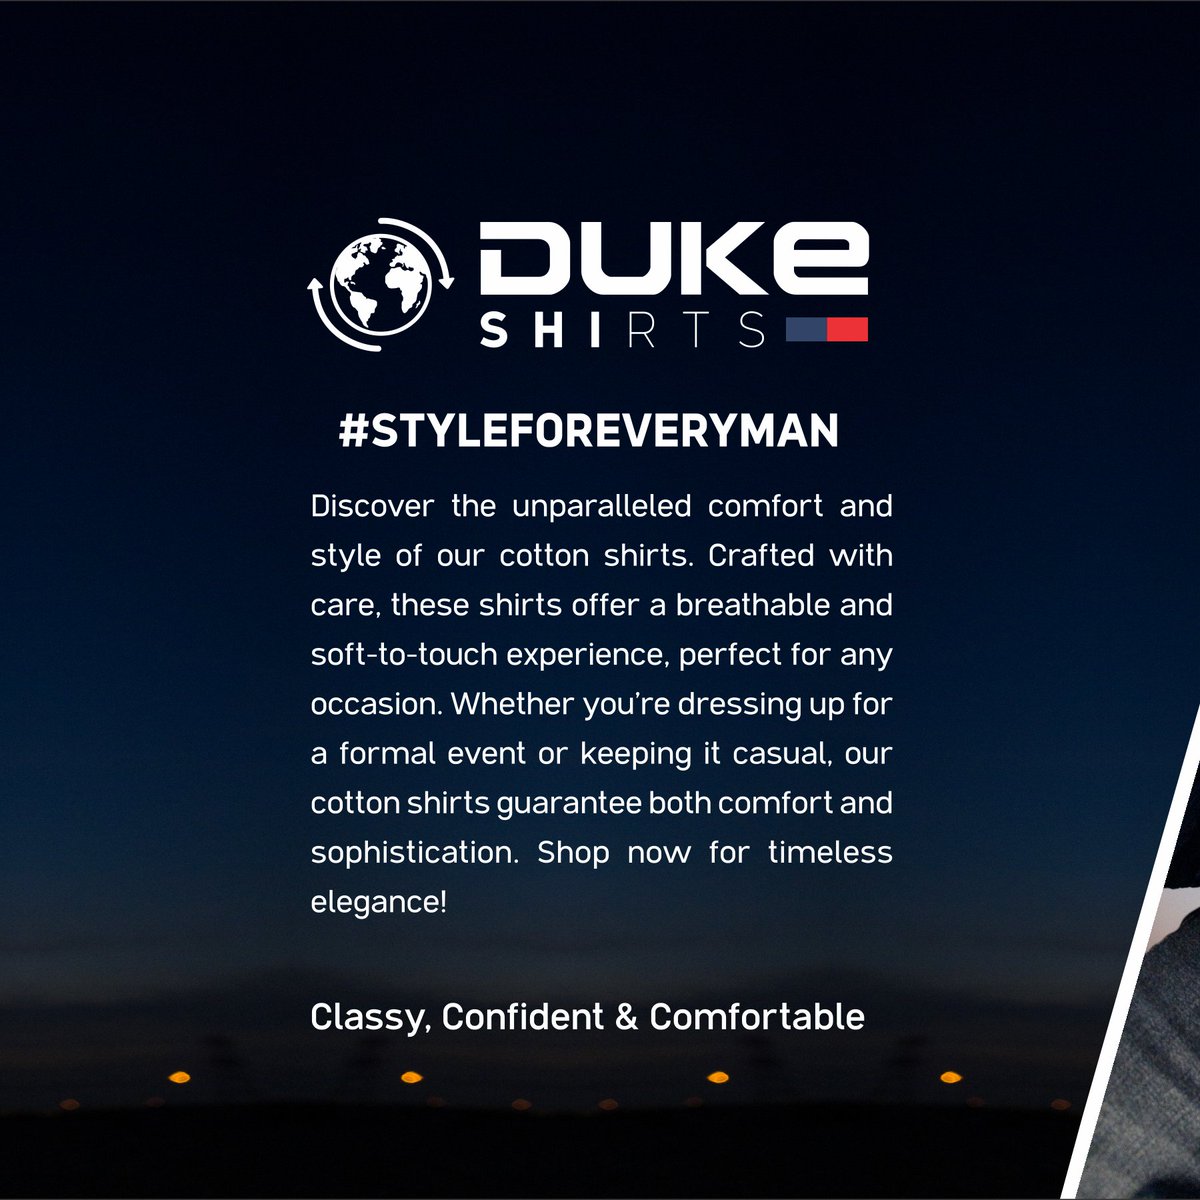 Classy, Confident, & Comfortable: Duke's stylish #shirtsdesign!

Don't miss out on the season's hottest looks.
dukeindia.com/collections/su…

#springsummer #latestfashion #outfitoftheday #picoftheday